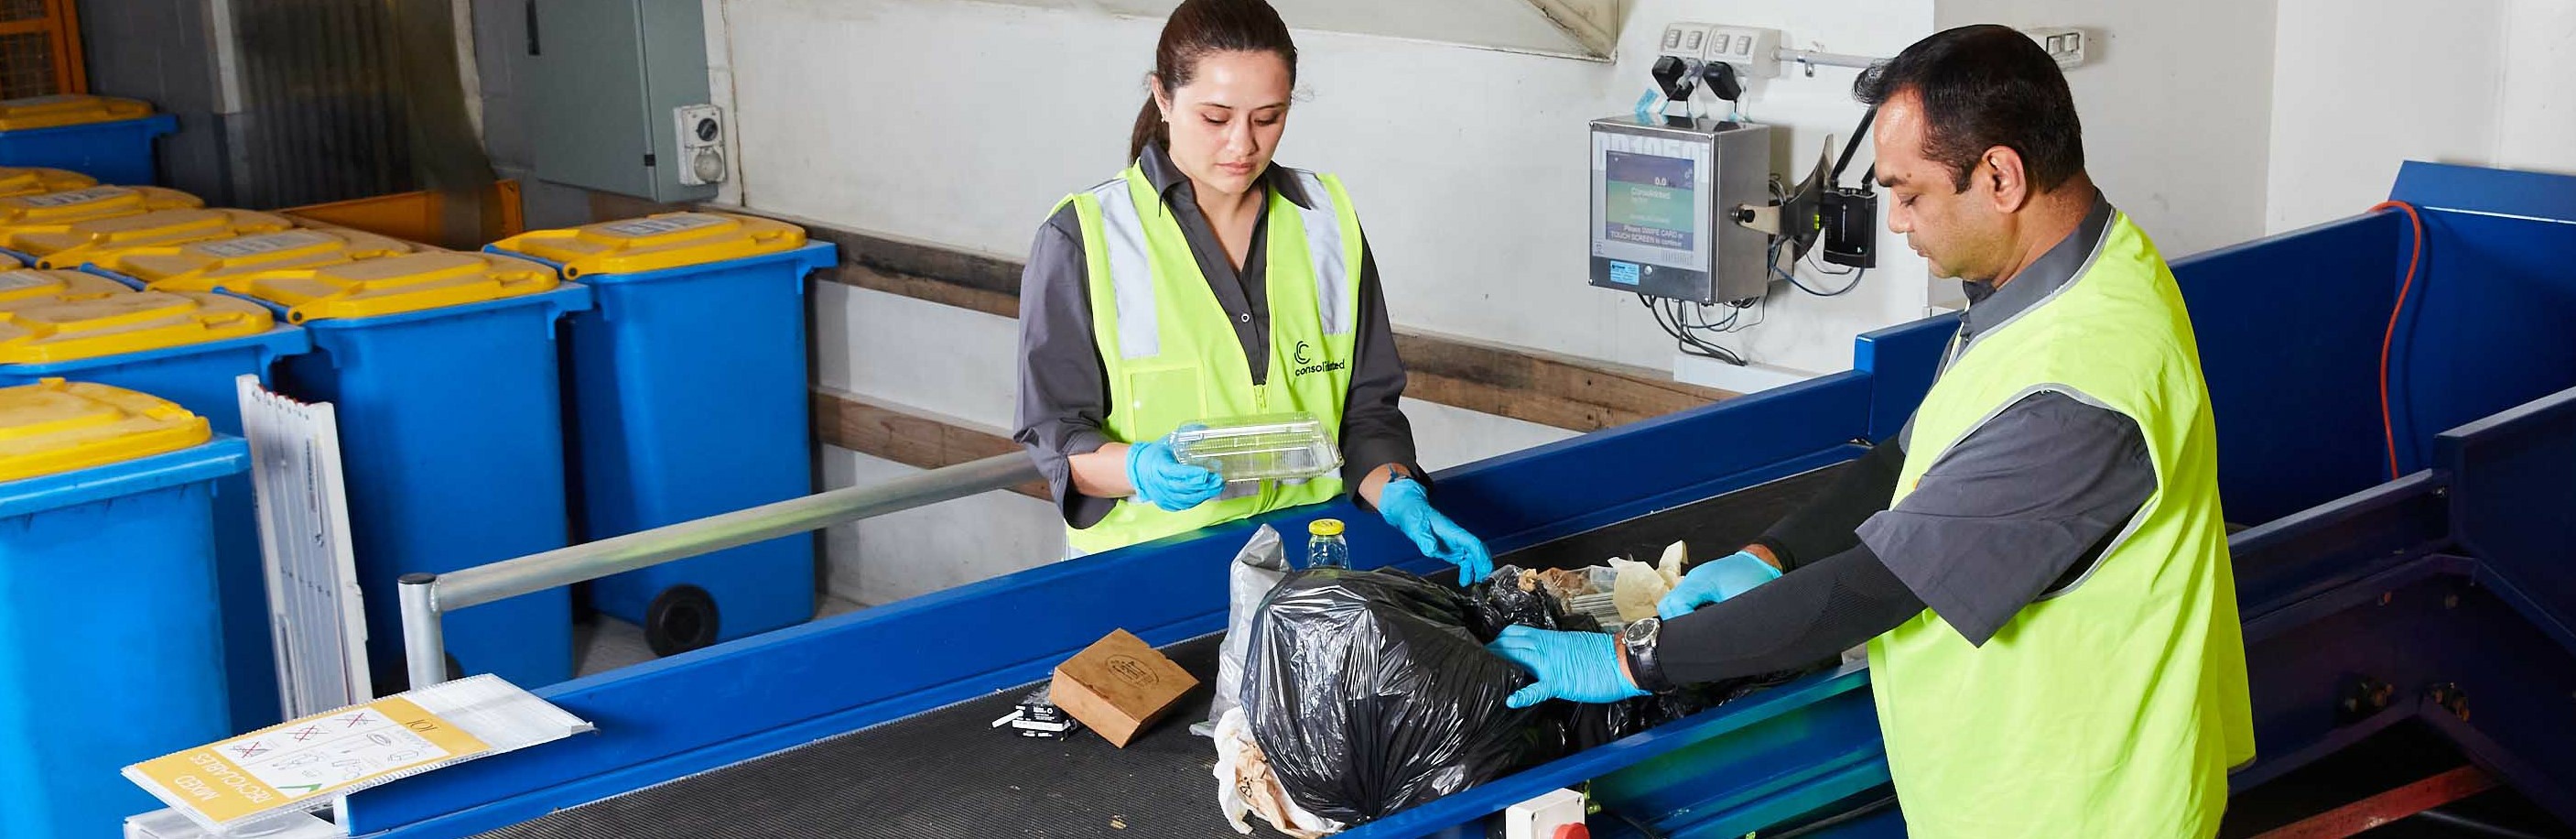 Staff sorting recycling on a conveyor belt